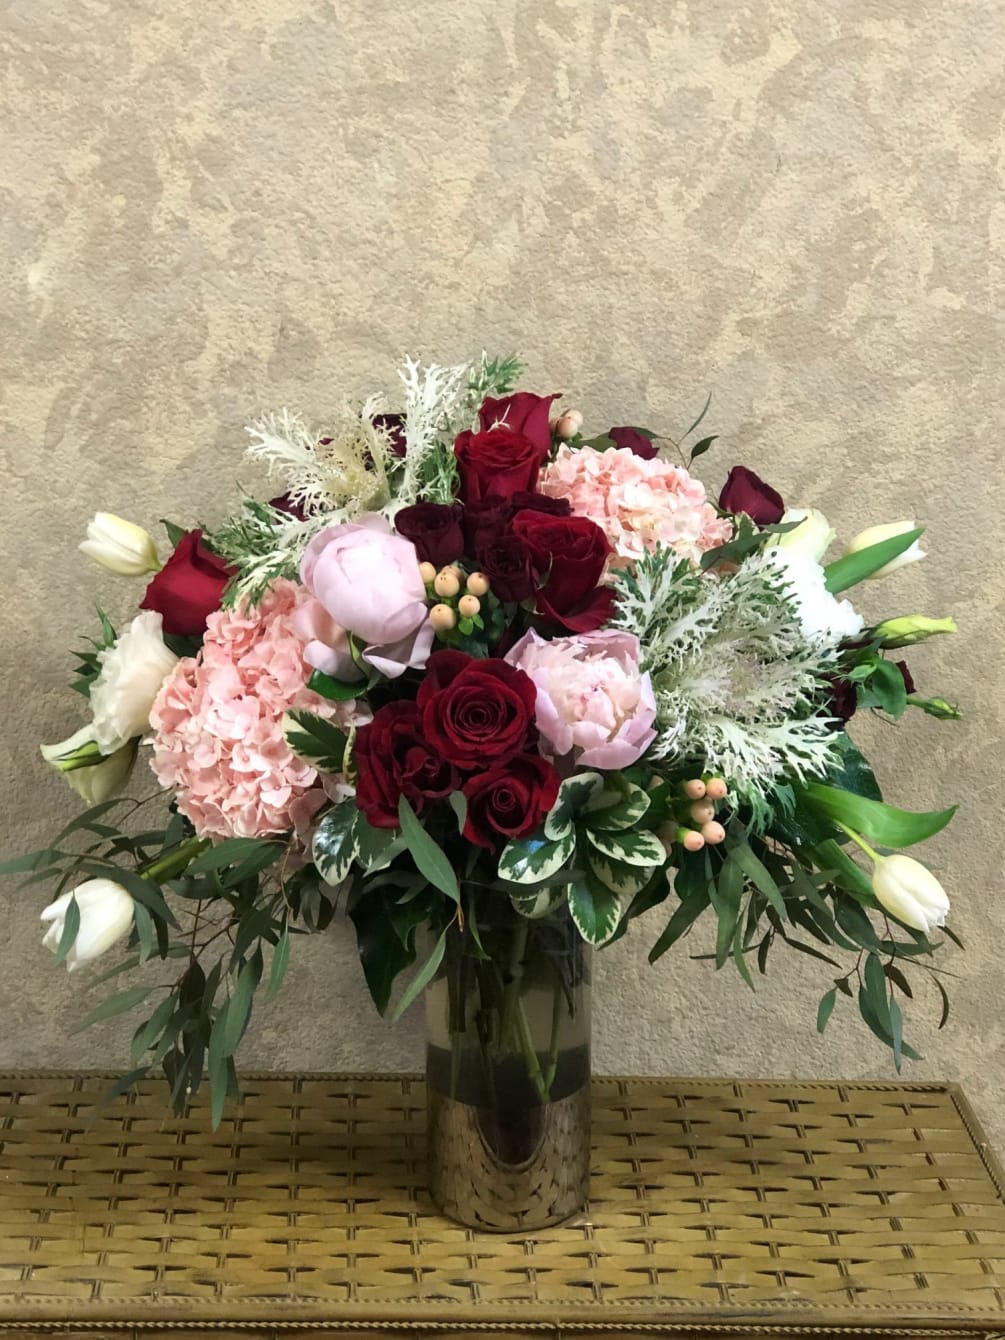 Type of Flowers: Pink Peonies, Pink Hydrangeas, Red Roses, White Lisianthus, White